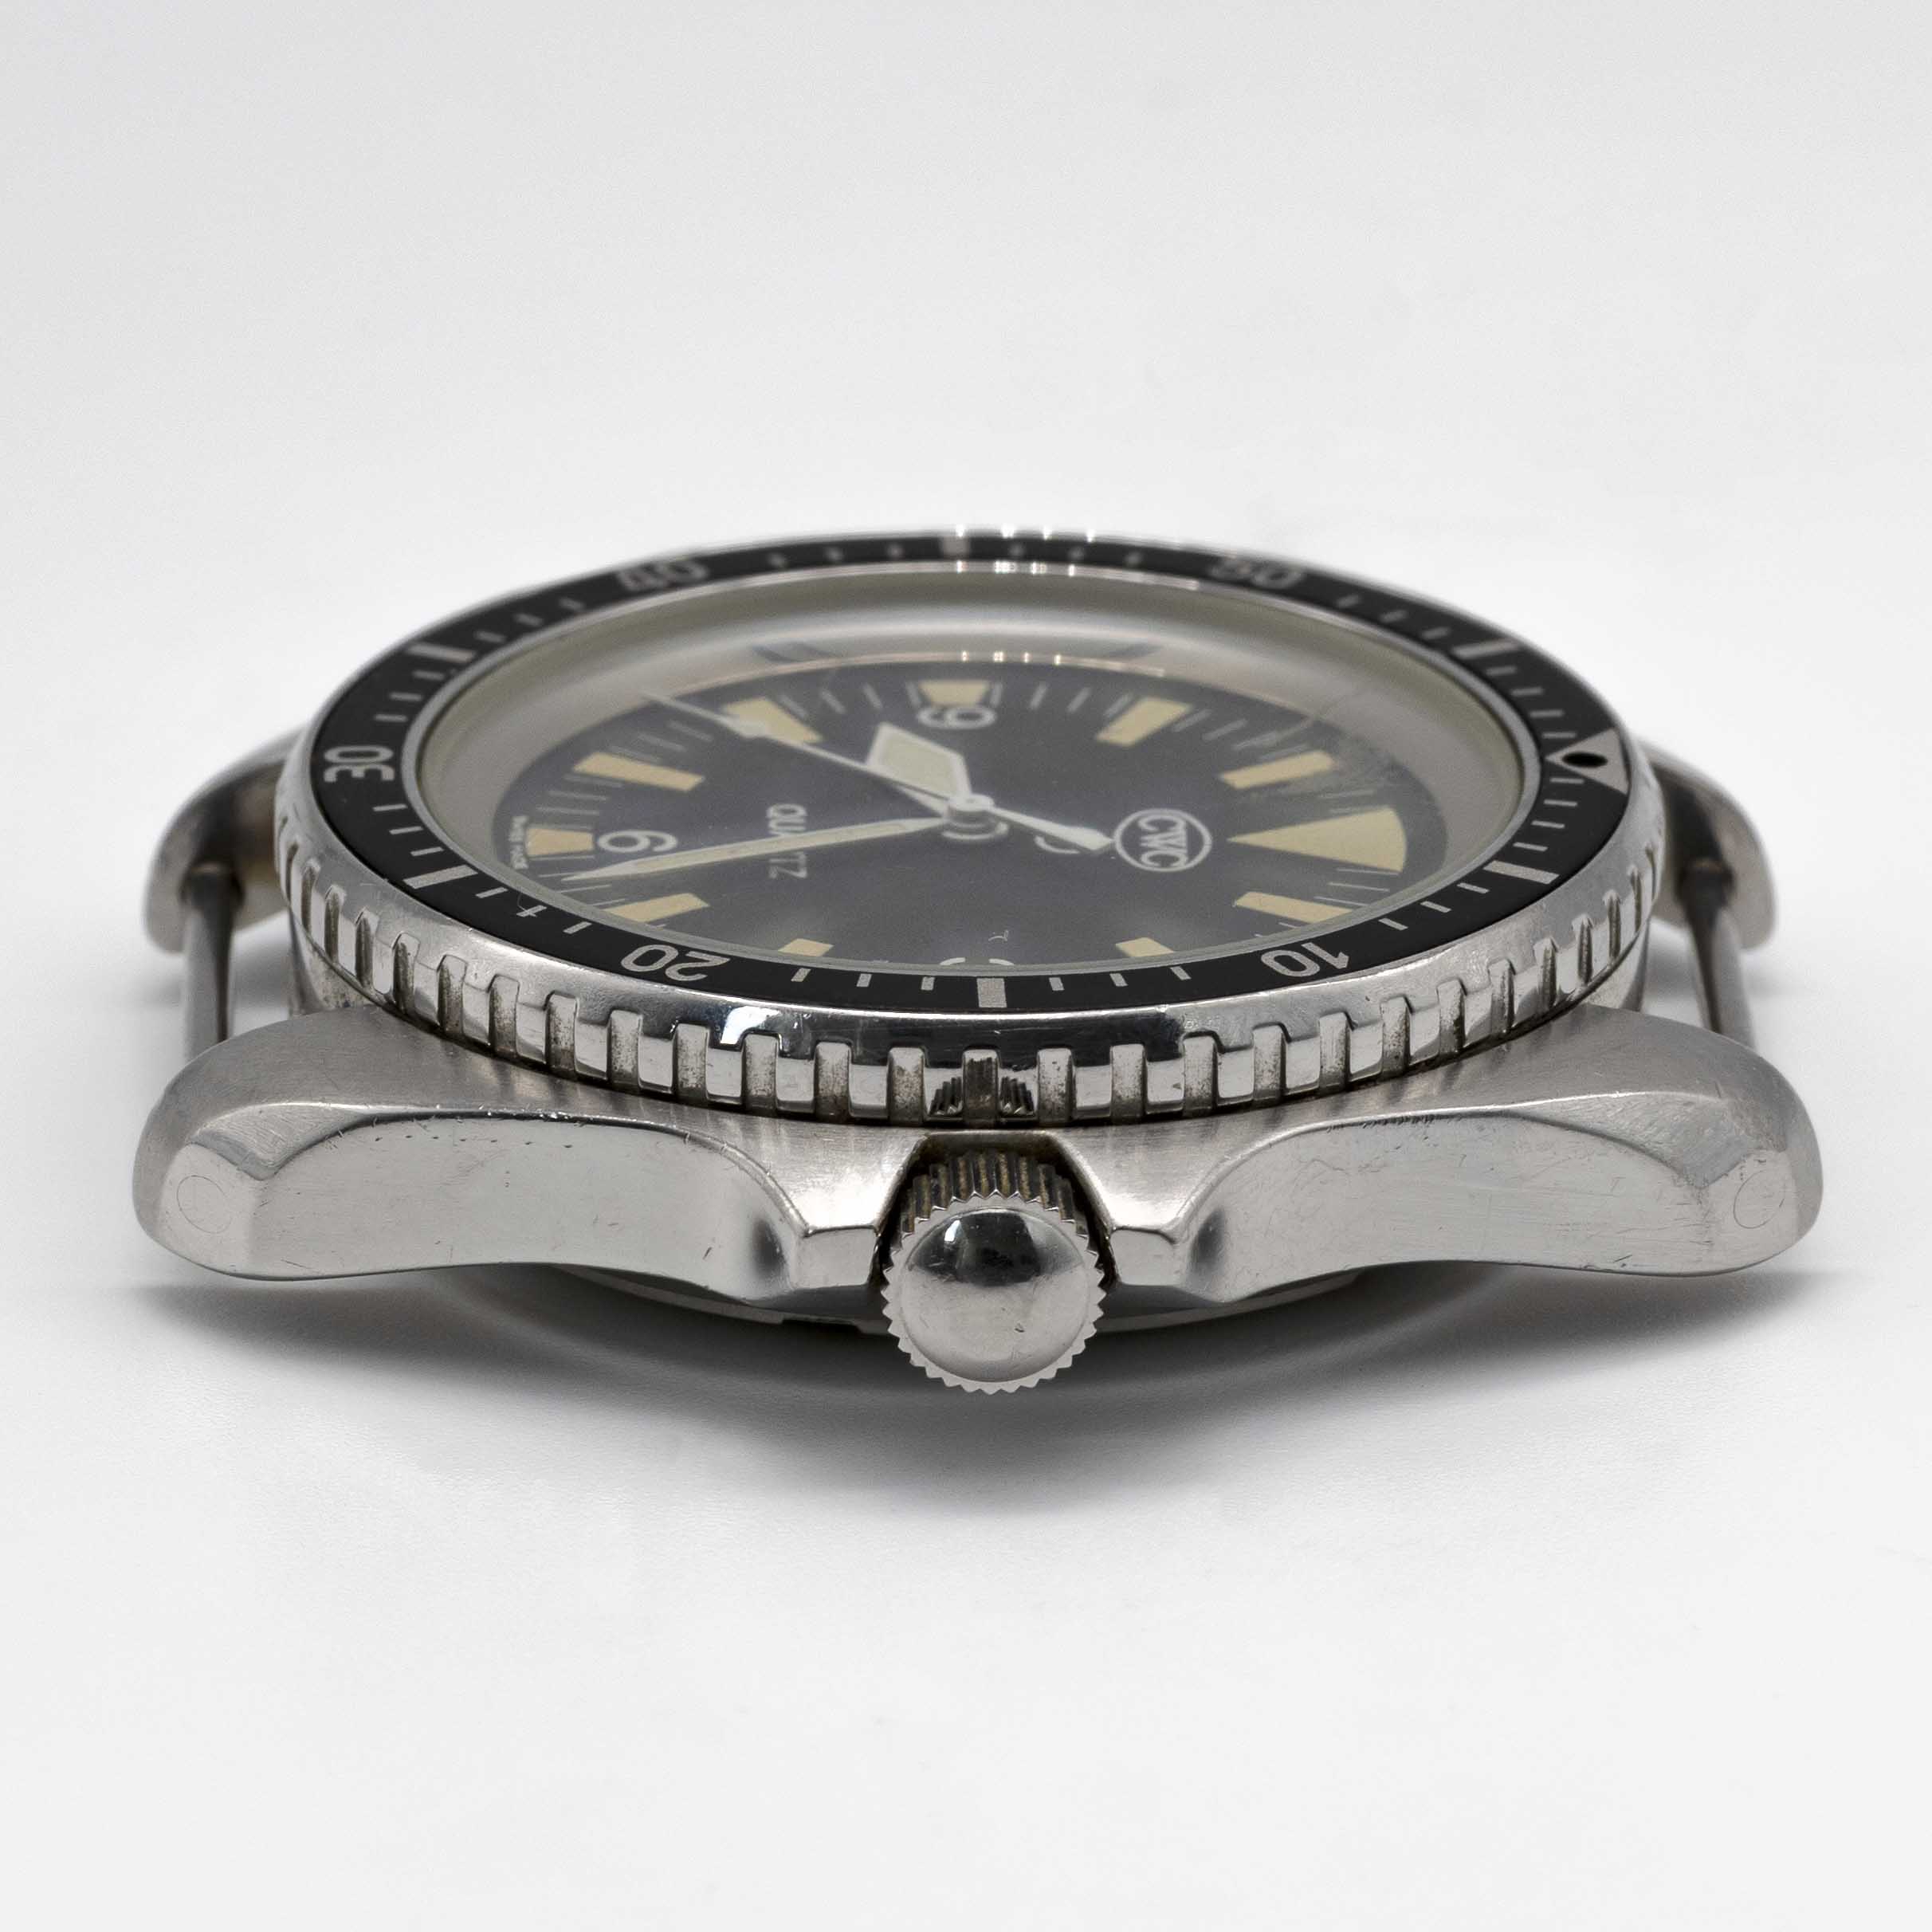 A GENTLEMAN'S STAINLESS STEEL BRITISH MILITARY ISSUED CWC QUARTZ ROYAL NAVY DIVERS WRIST WATCH DATED - Image 7 of 8